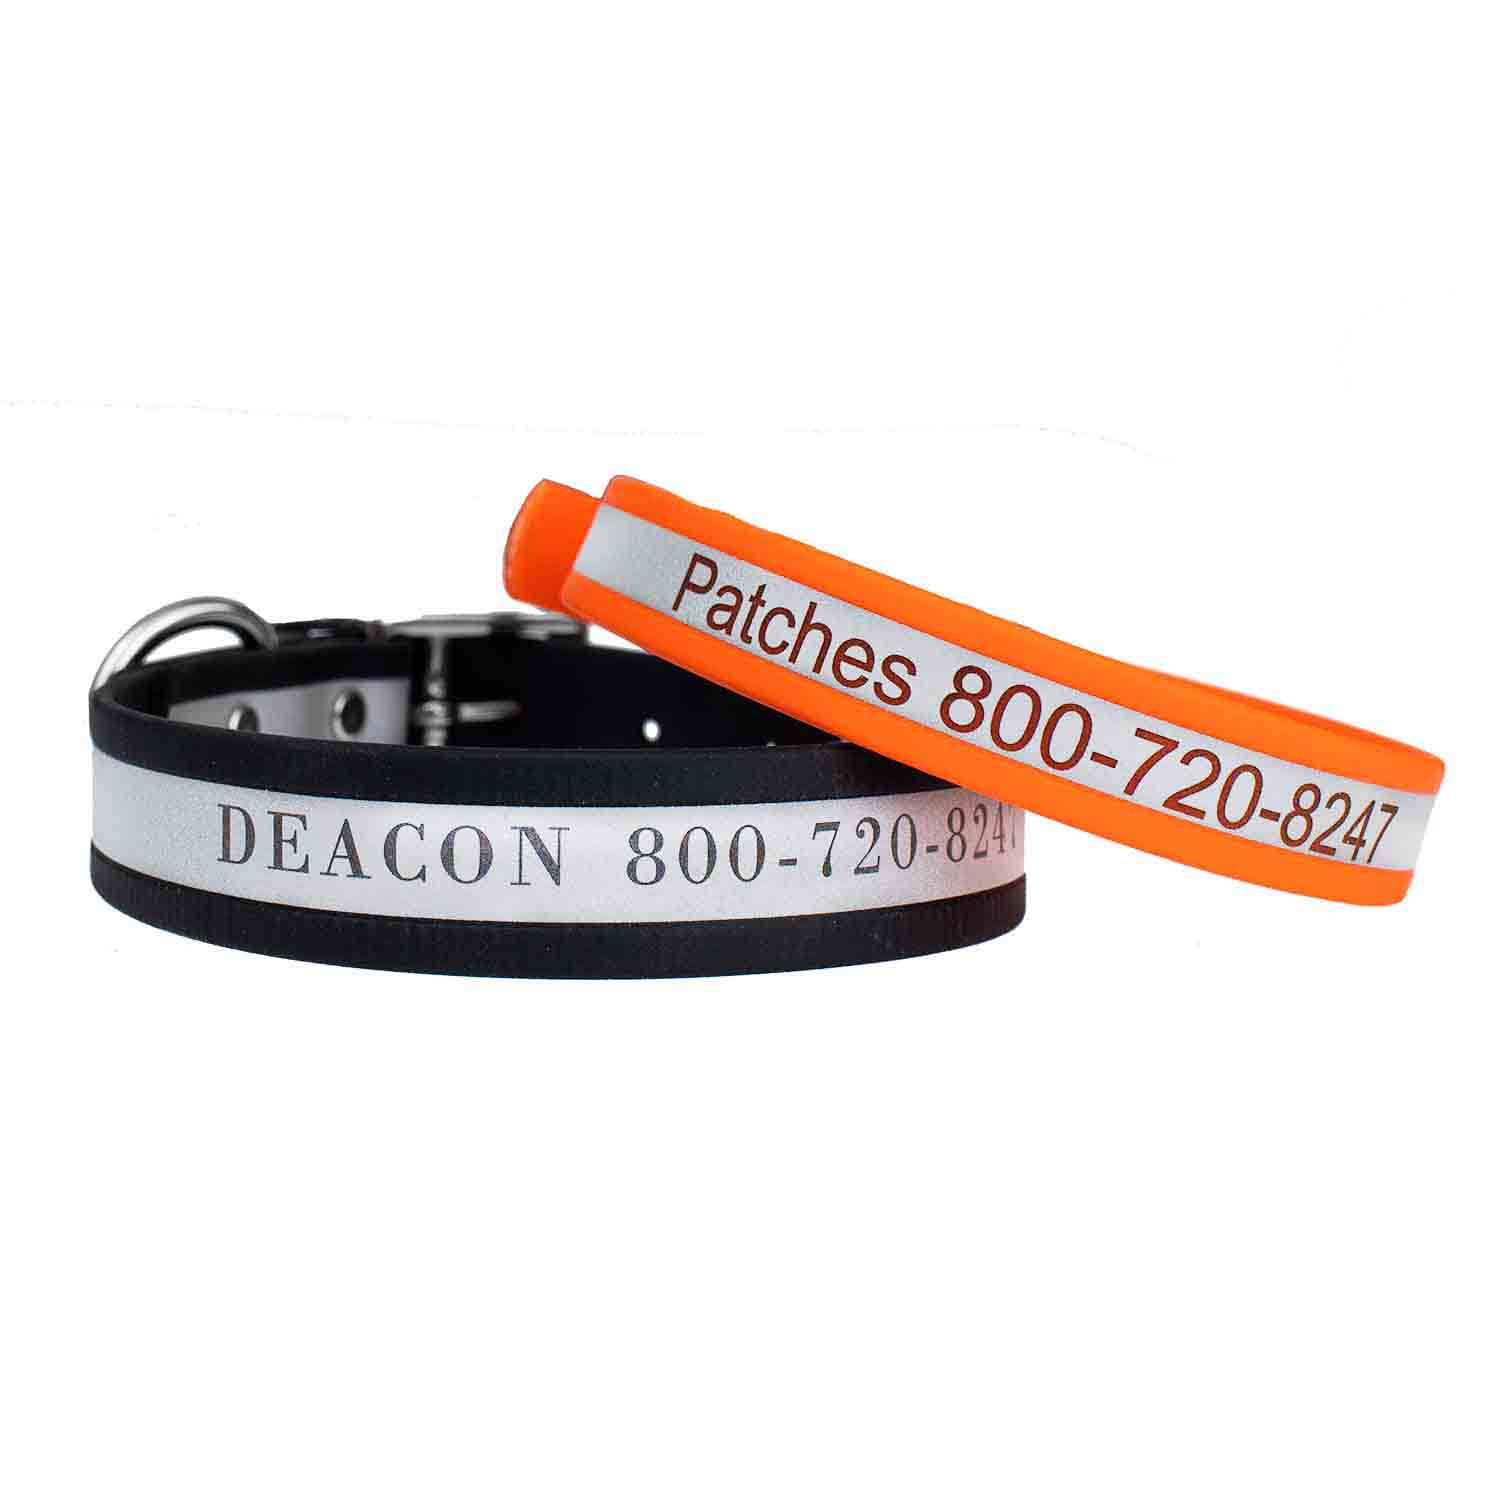 Engraved Reflective Waterproof Soft Grip Dog Collar Group